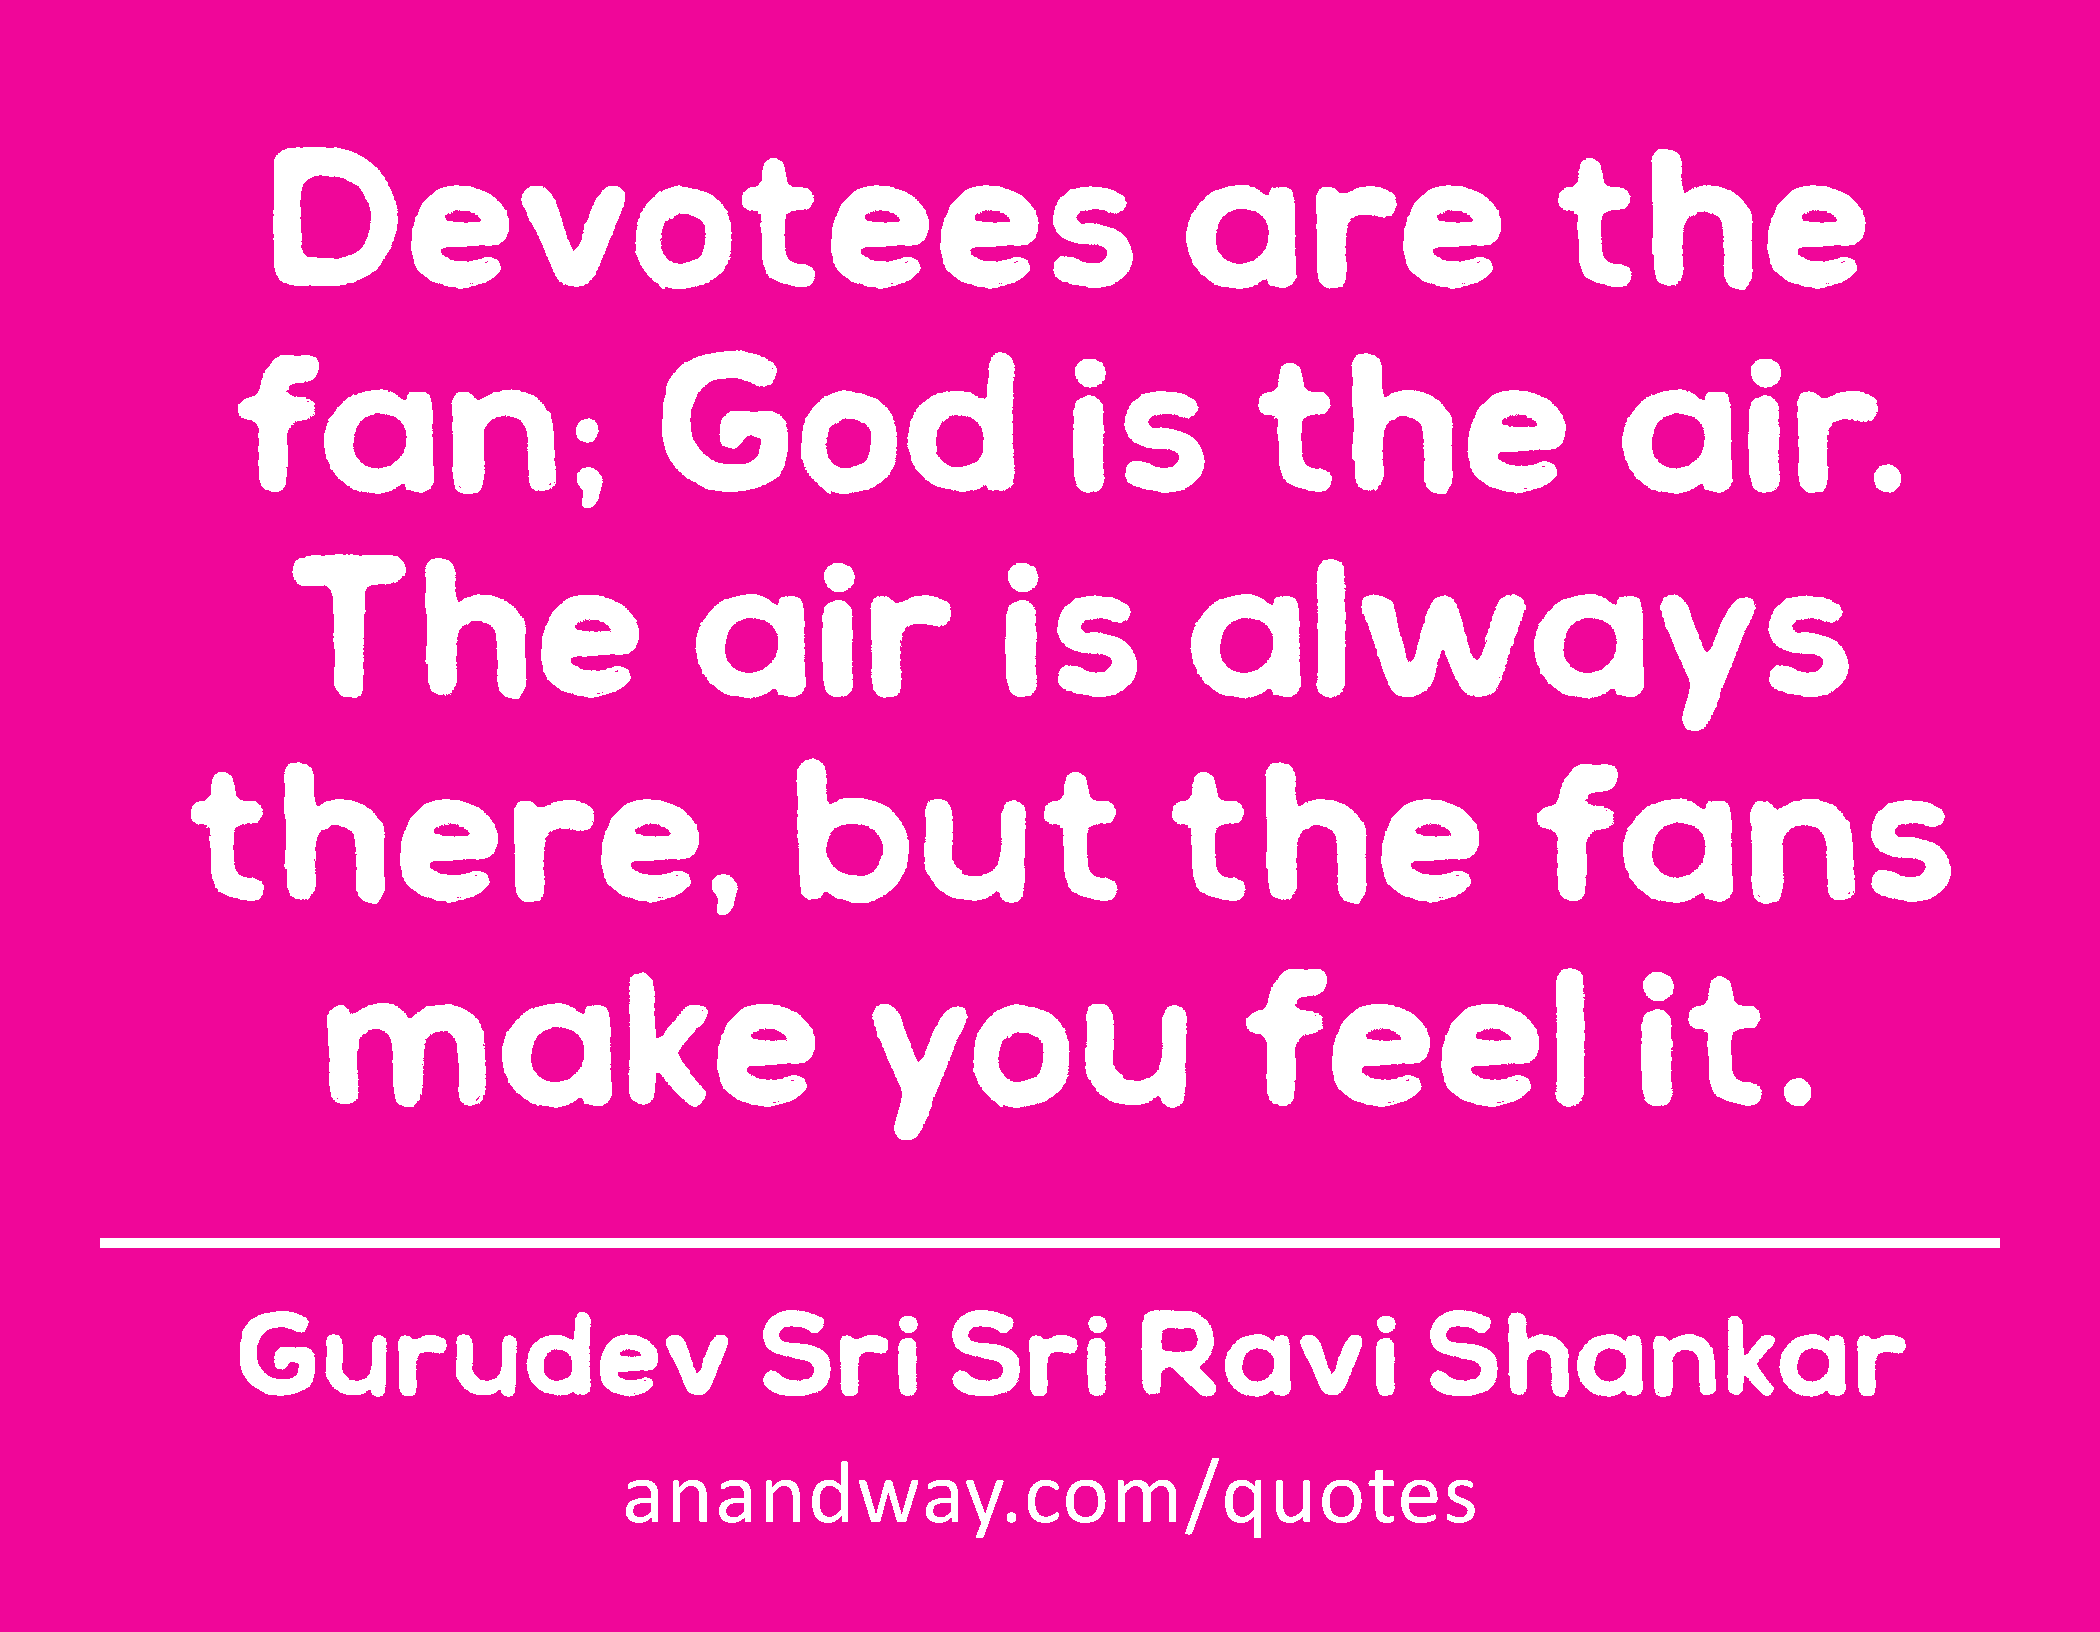 Devotees are the fan; God is the air. The air is always there, but the fans make you feel it. 
 -Gurudev Sri Sri Ravi Shankar